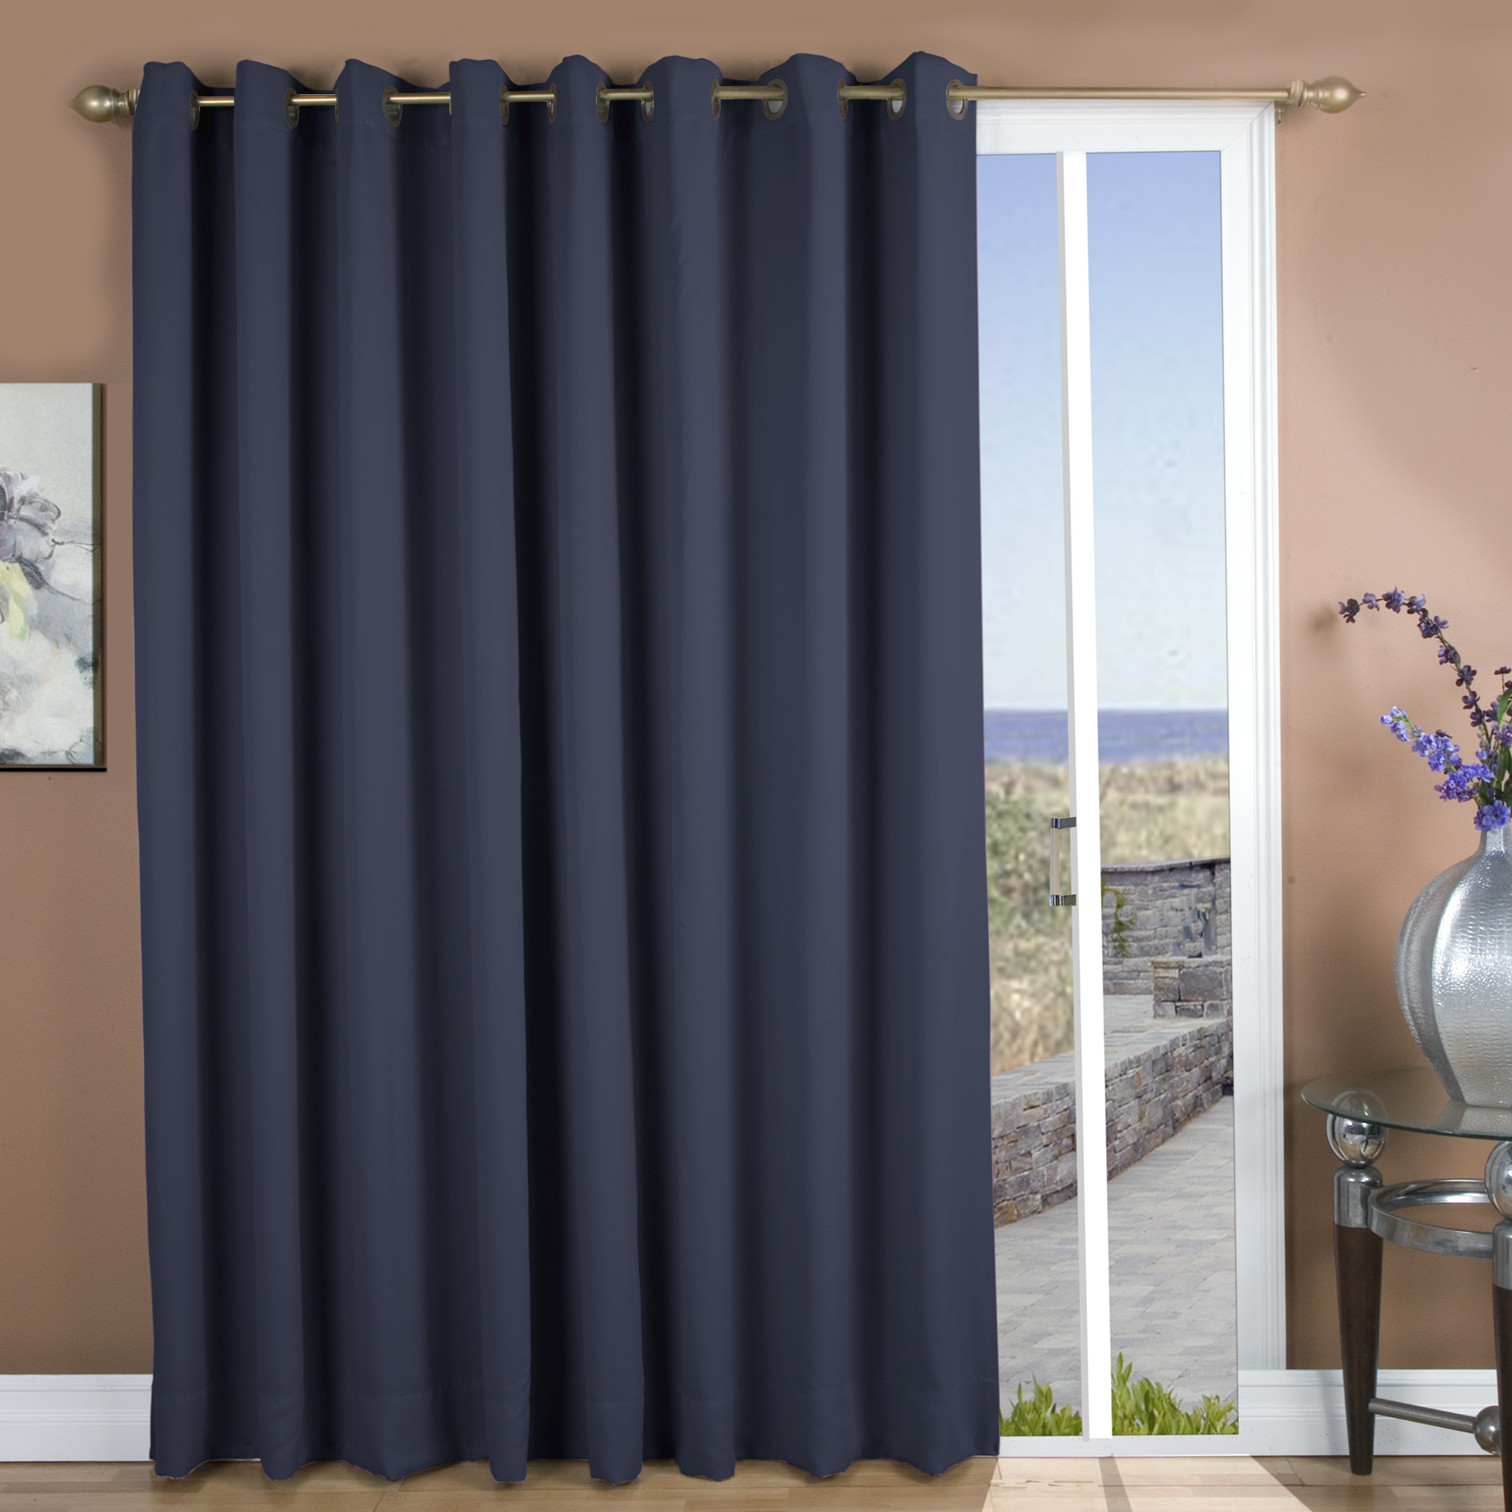 outdoor curtains black photo - 6